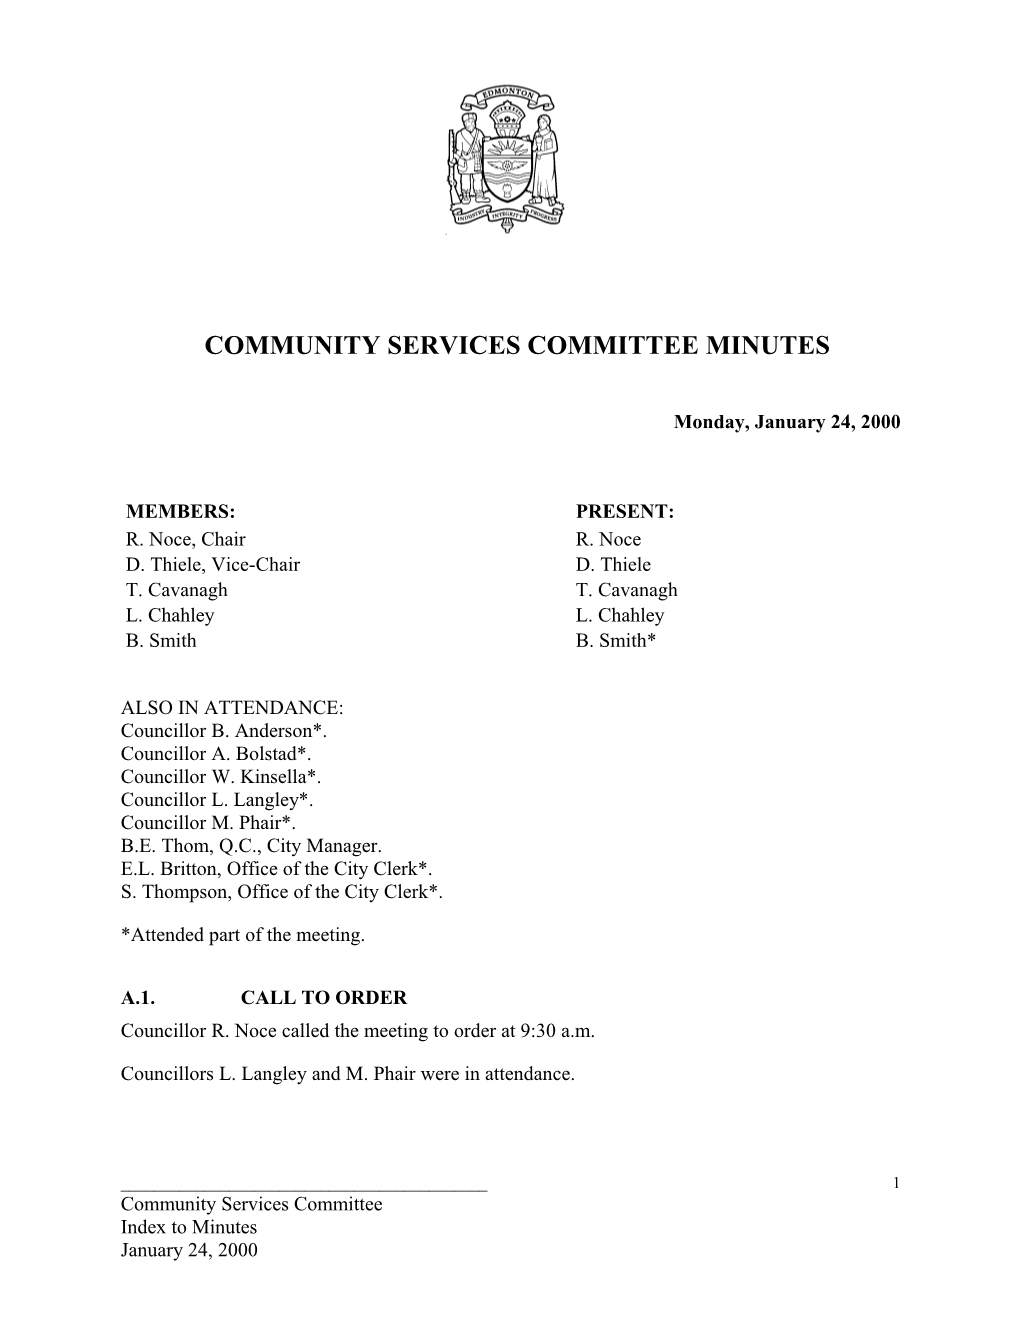 Minutes for Community Services Committee January 24, 2000 Meeting